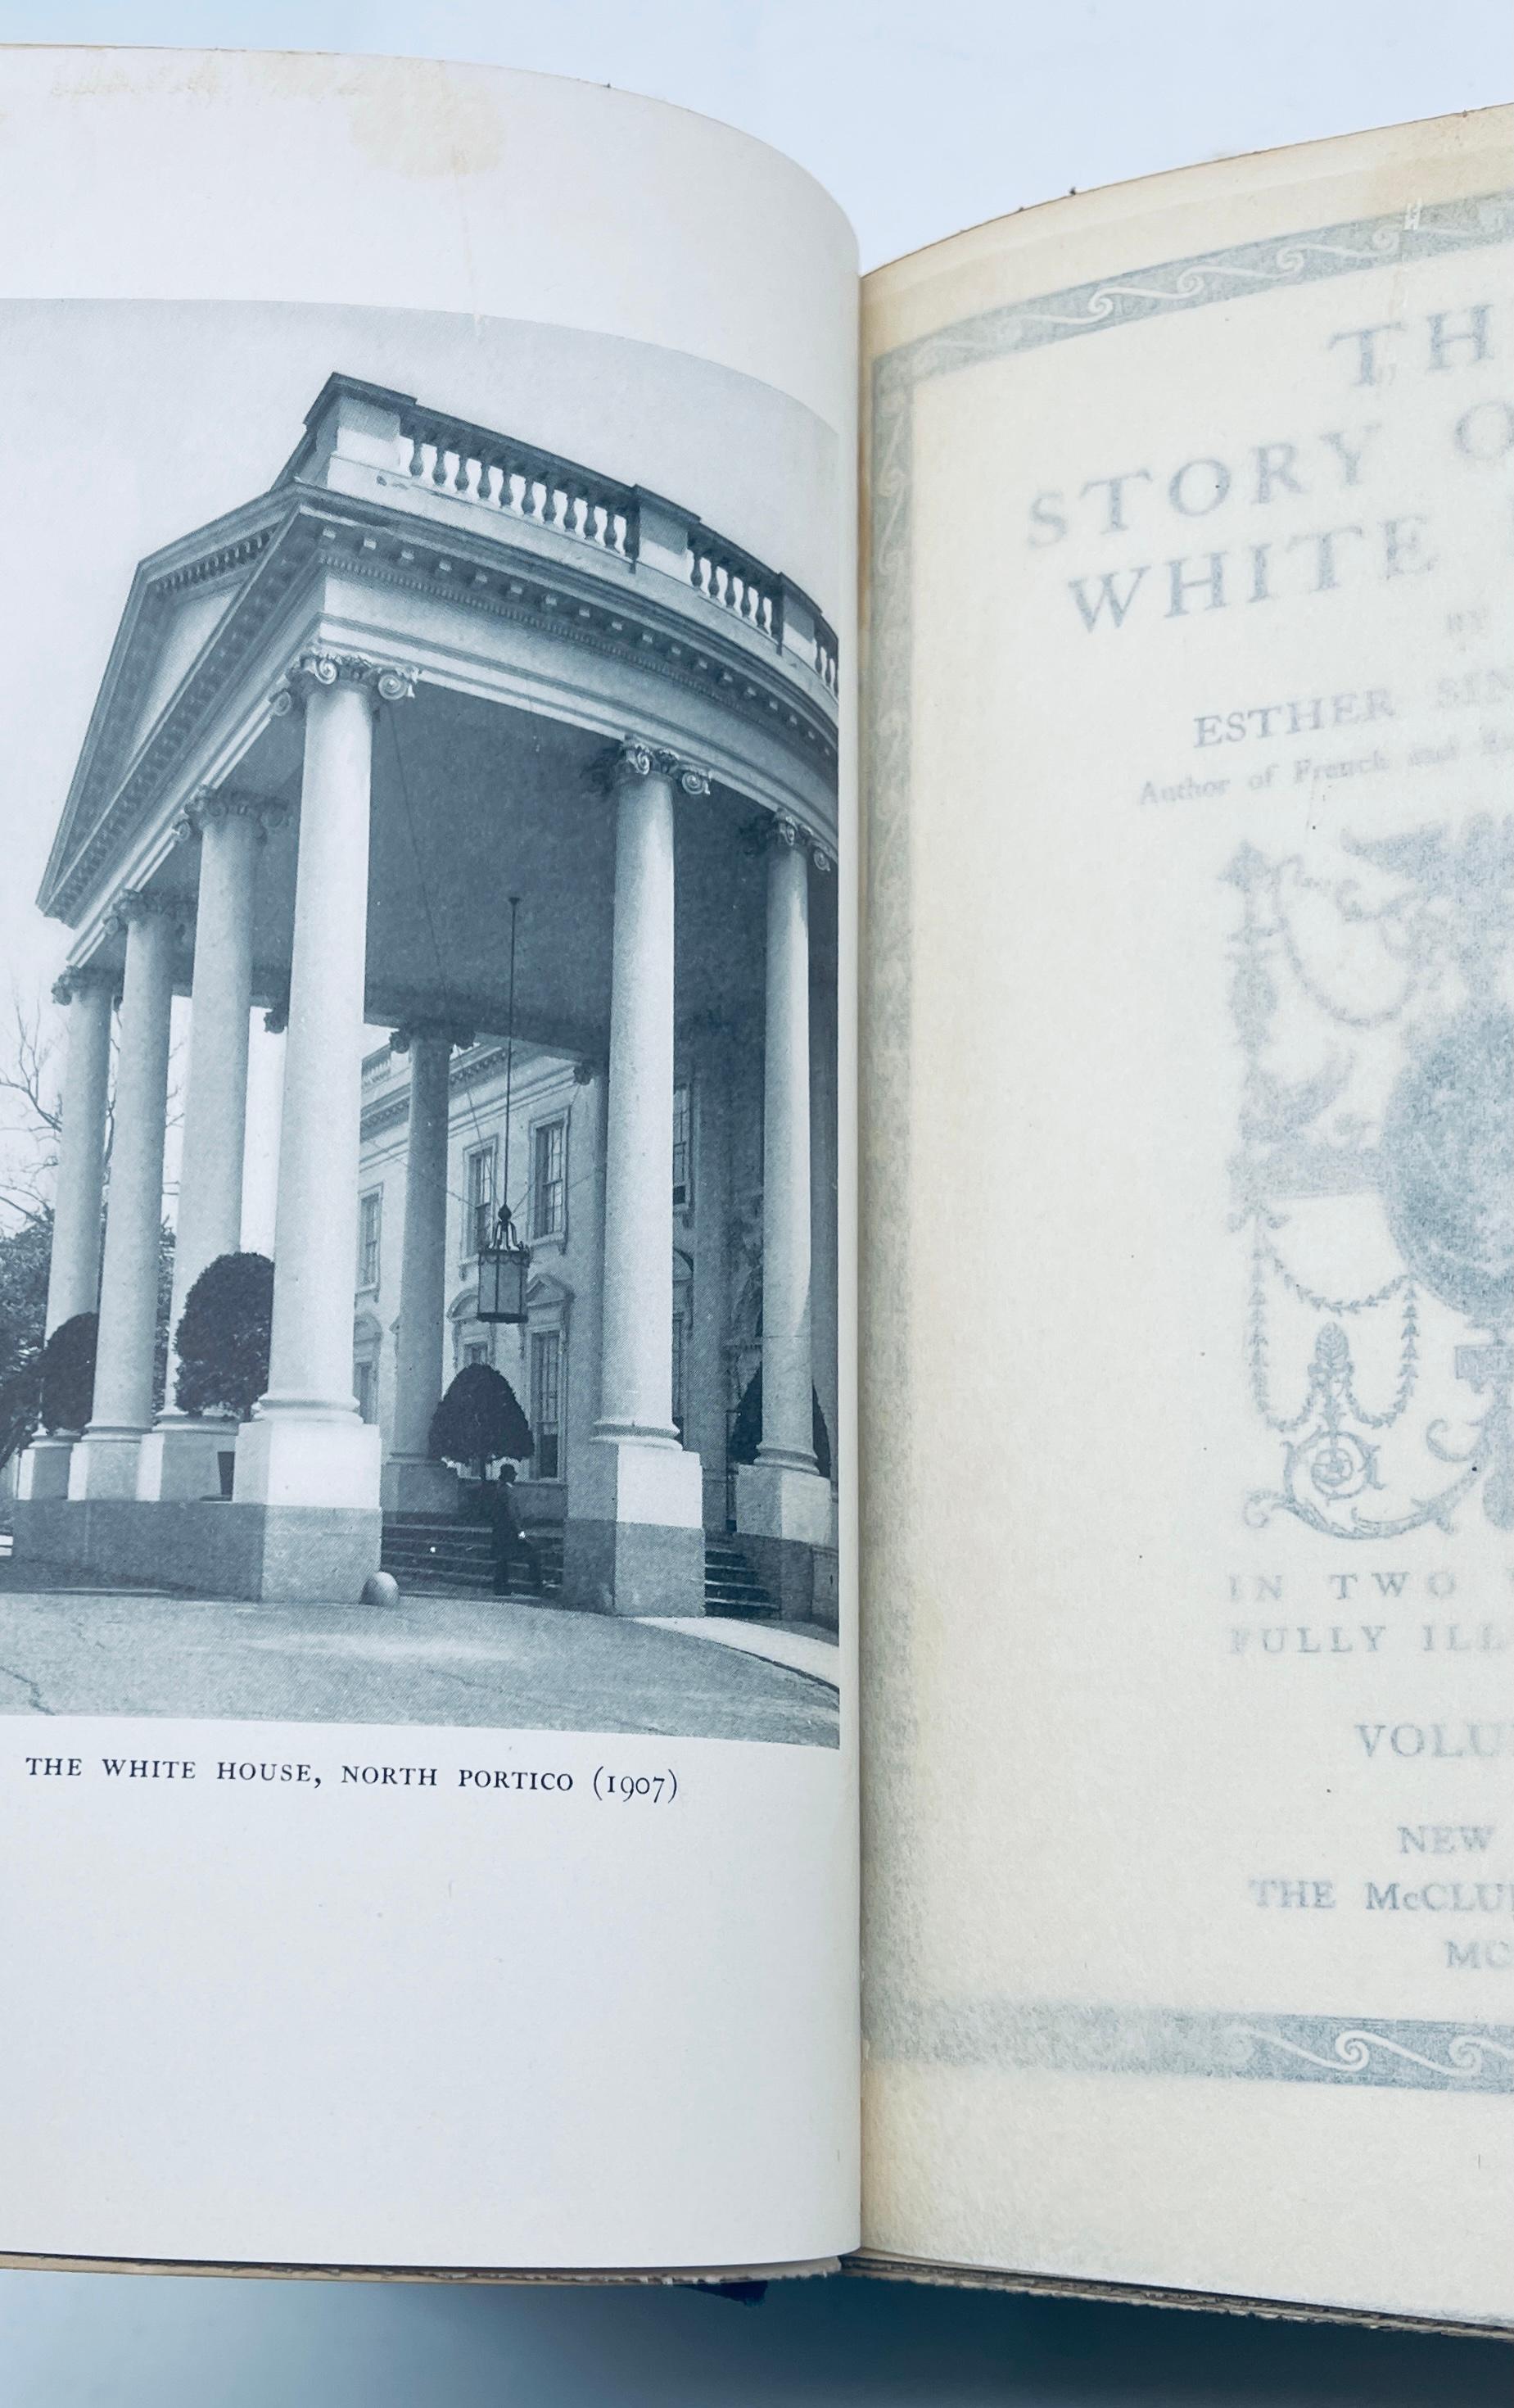 The Story of the White House (1907) by Edith Singleton -  Two Volume Set